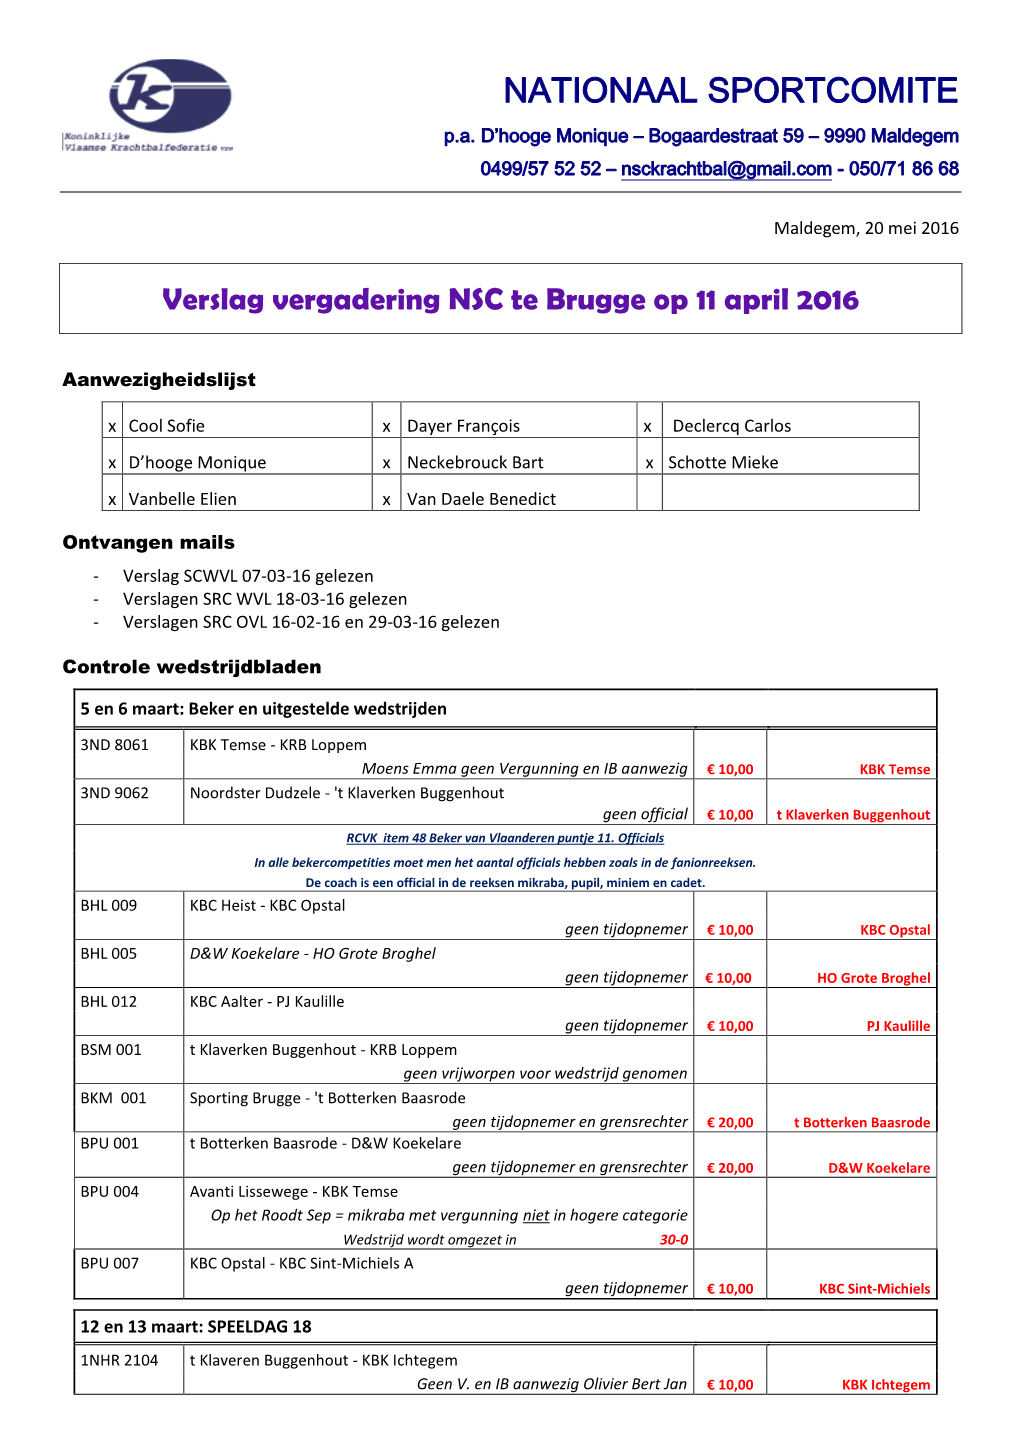 NATIONAAL SPORTCOMITE P.A